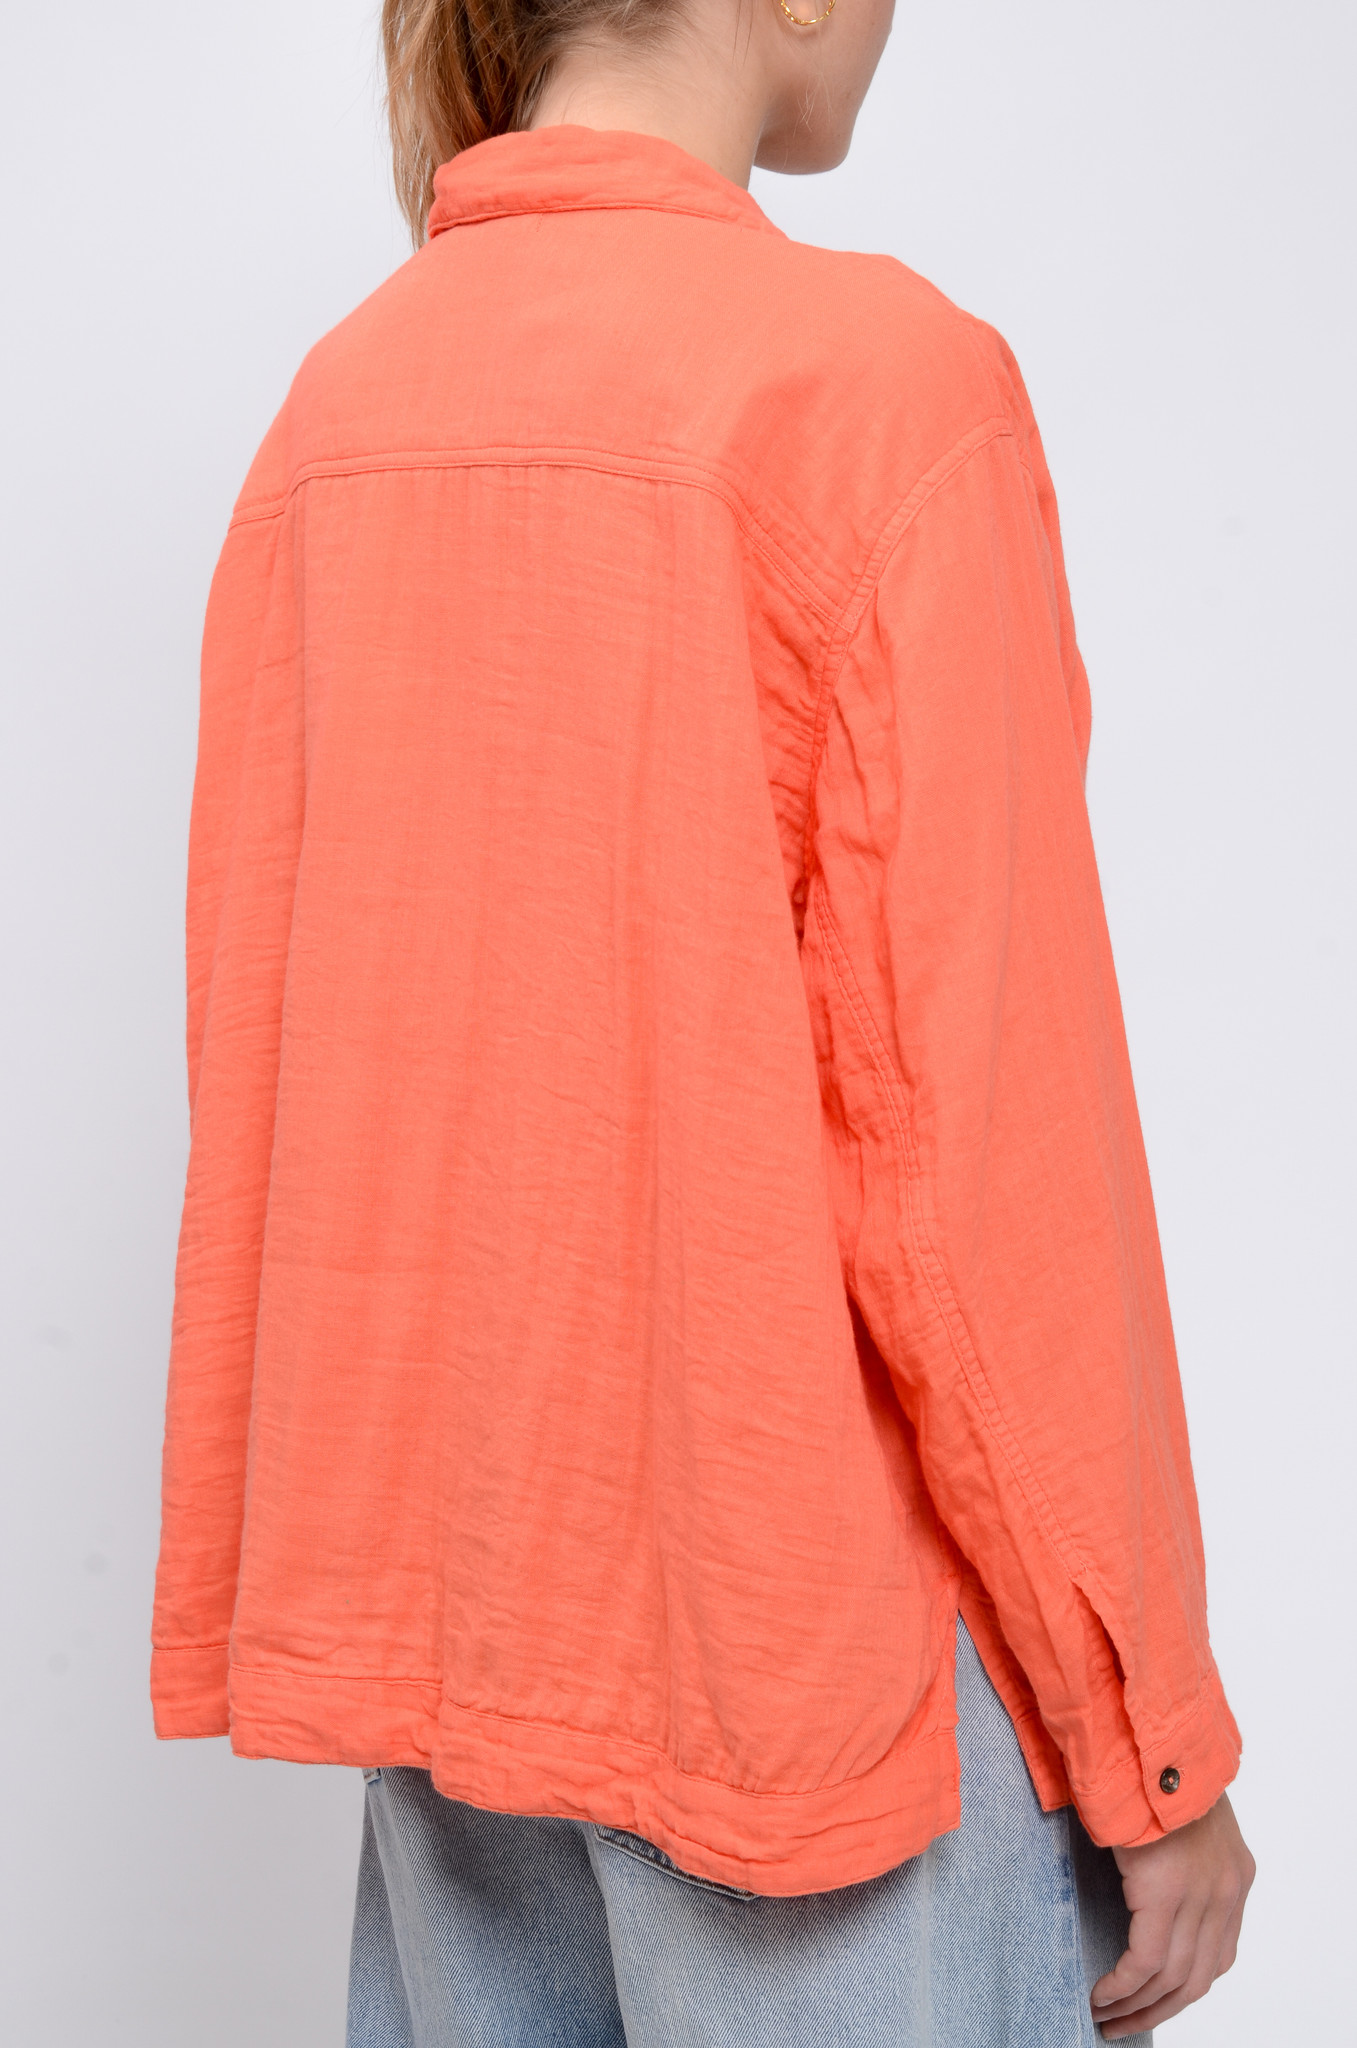 EJA TOP IN CORAL RED-4